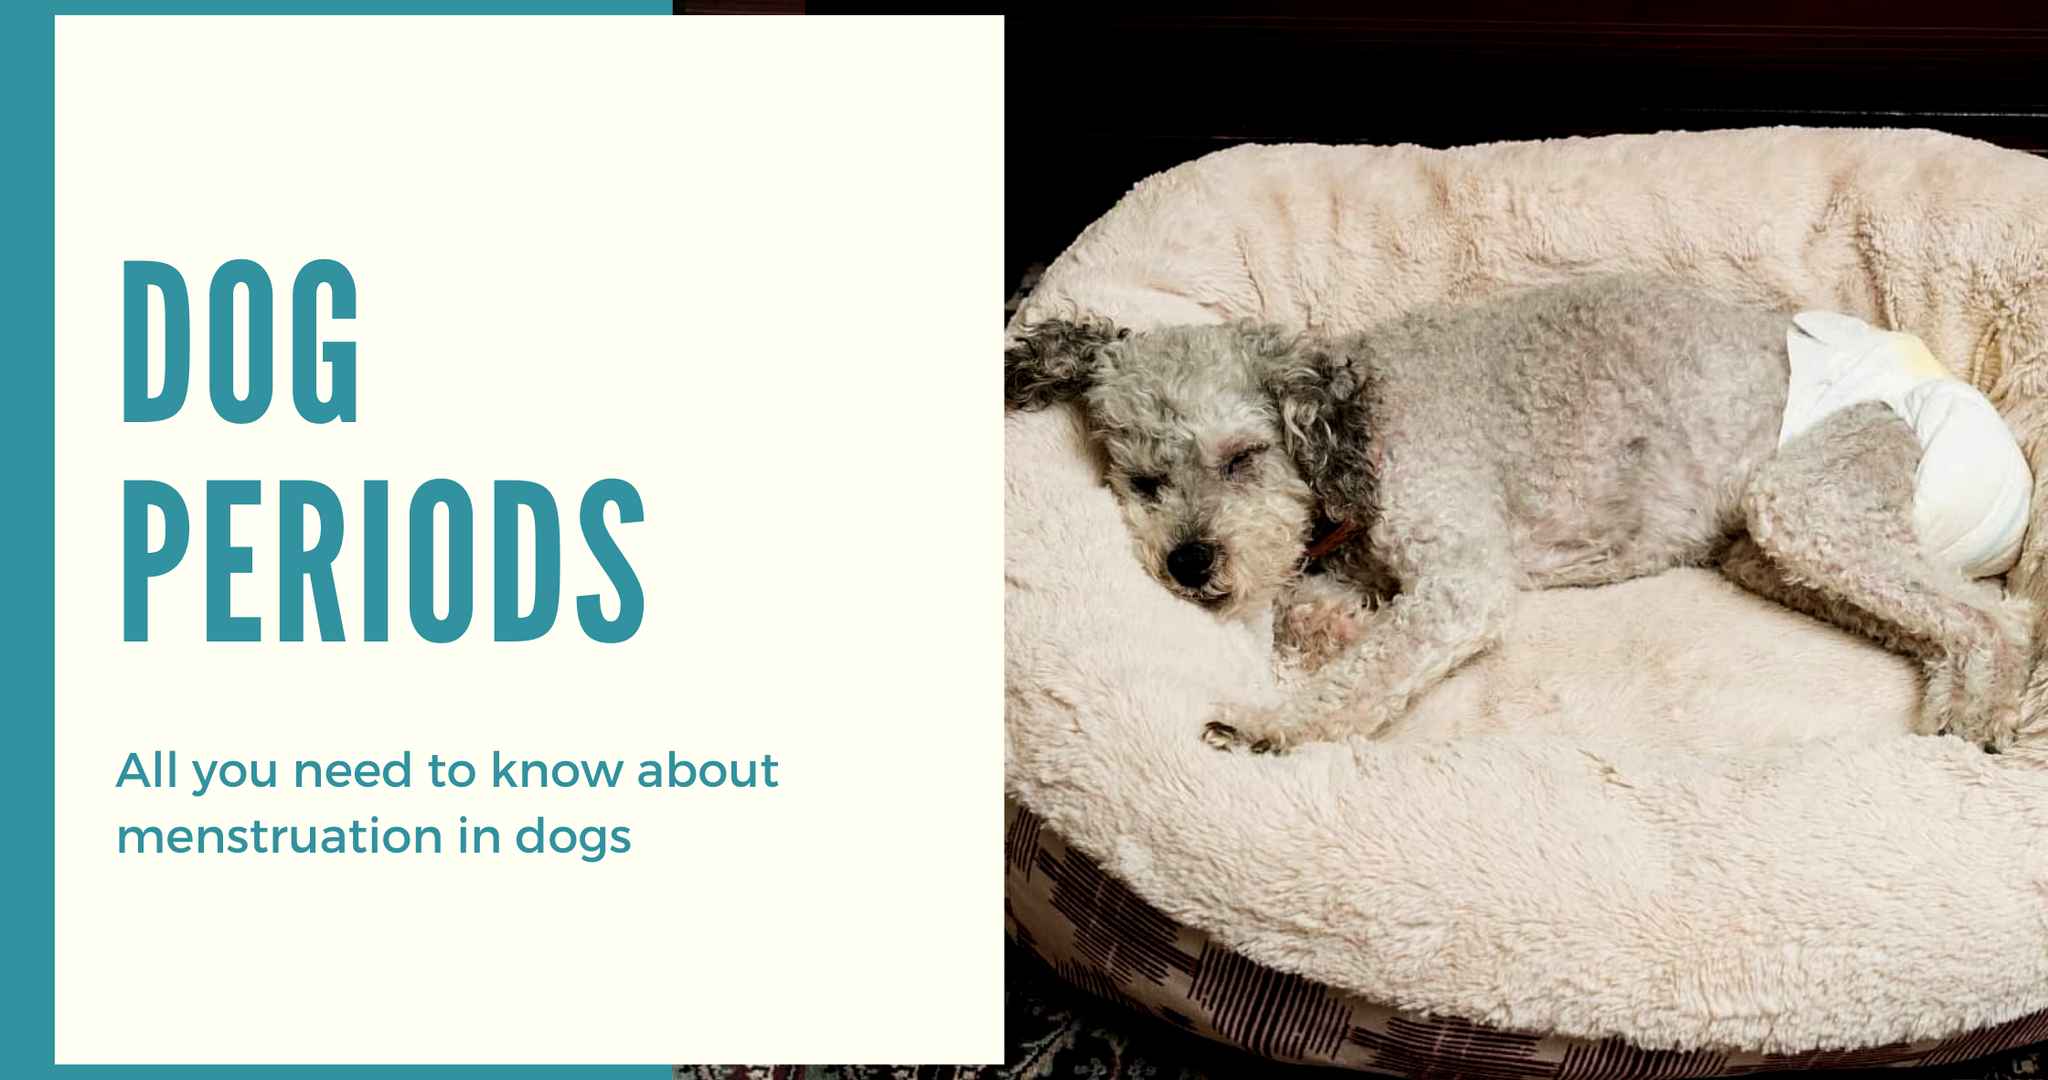 Menstruation in Dogs: All You Need To Know